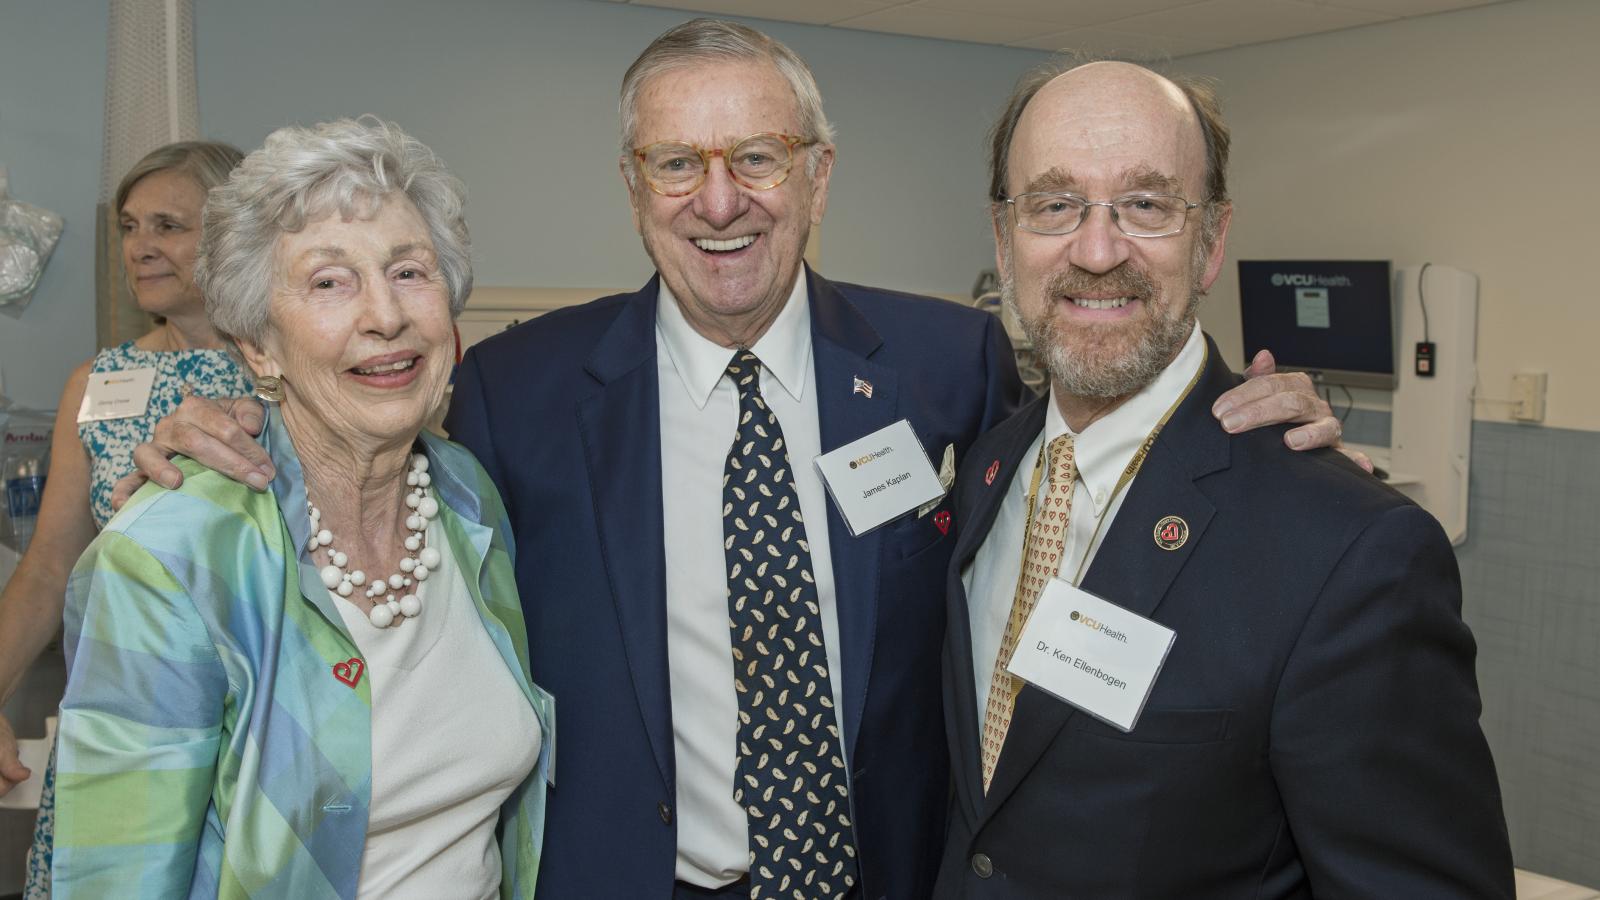 (L to R) Jane Kaplan, Jim Kaplan and Ken Ellenbogen, M.D., share a moment at the ribbon cutting for VCU Health’s new Cardiac Imaging Suite. Photo: Kevin Morley, VCU University Marketing